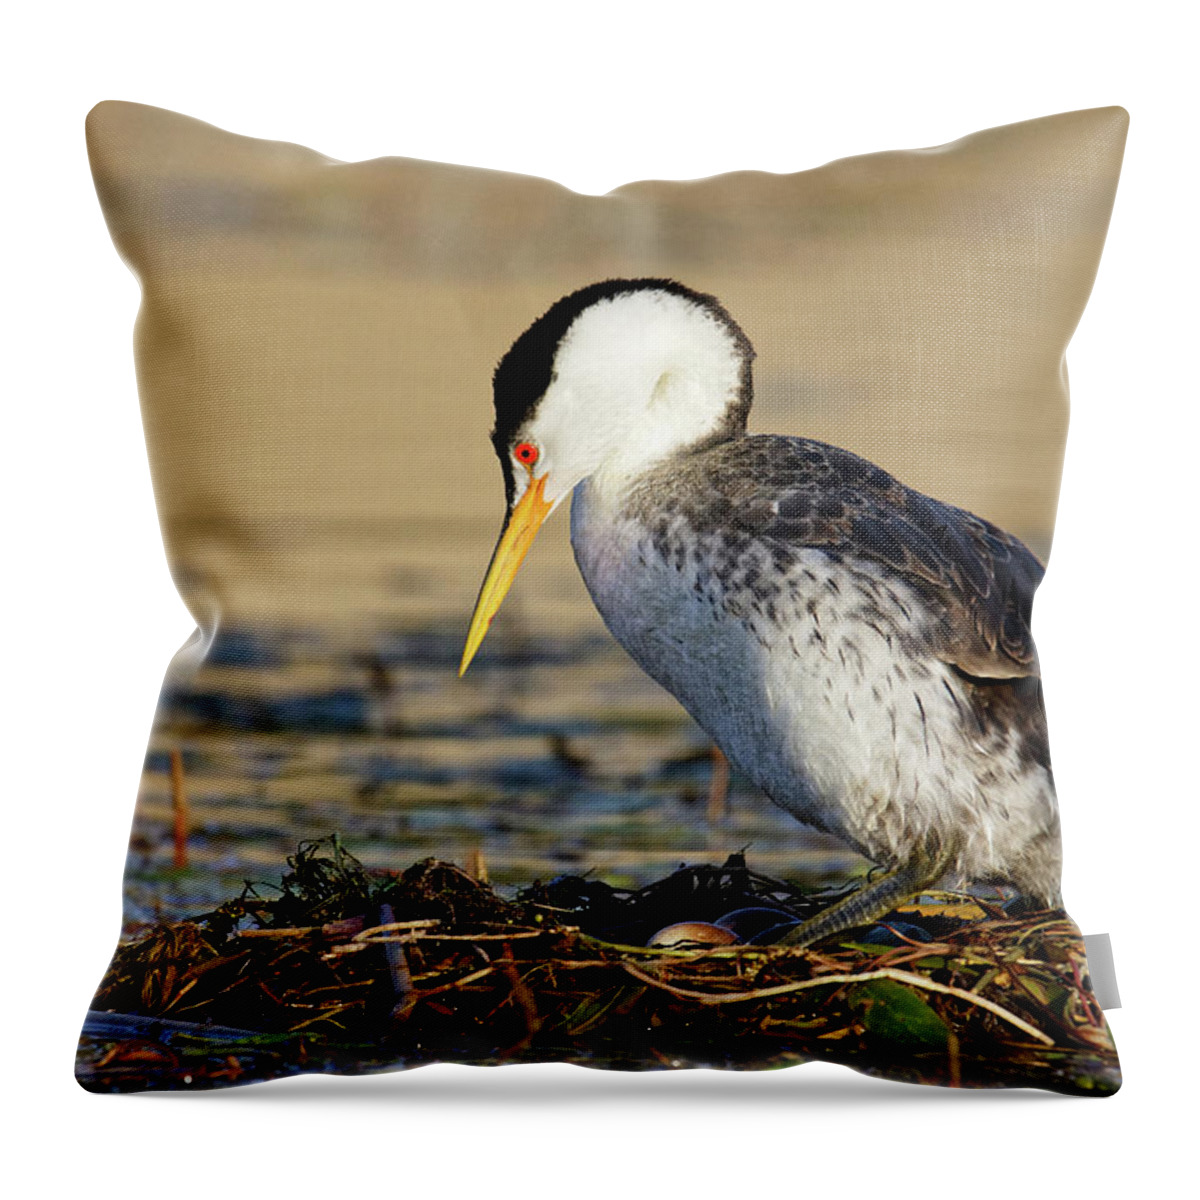 Don't Count Your Grebes... Throw Pillow featuring the photograph Don't Count Your Grebes... -- Clark's Grebe Nest with Eggs at Santa Margarita Lake, California by Darin Volpe